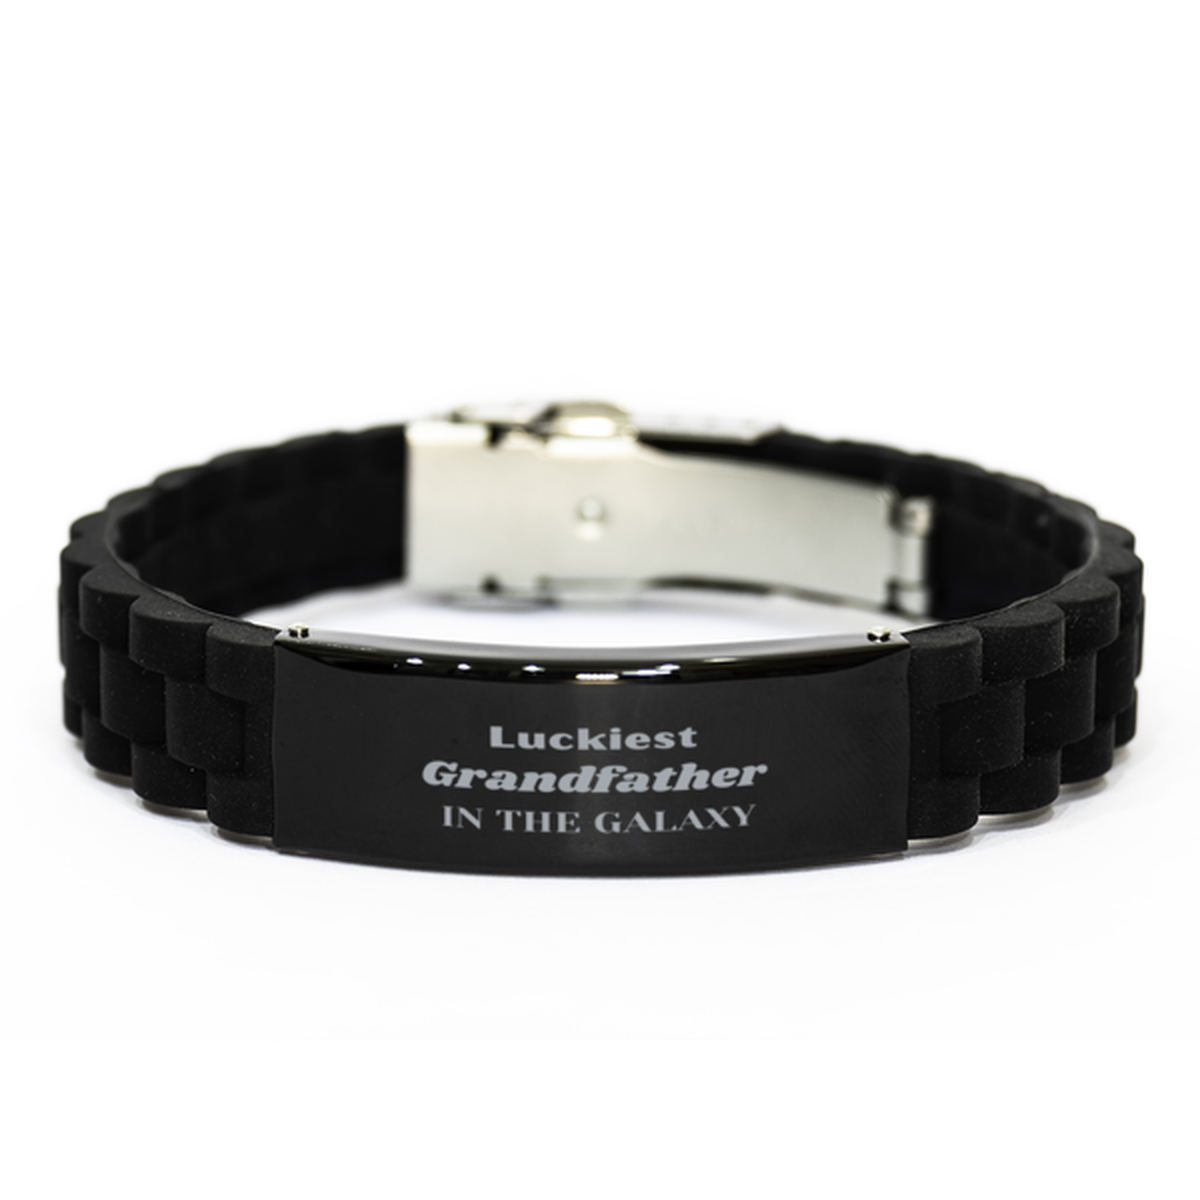 Luckiest Grandfather in the Galaxy, To My Grandfather Engraved Gifts, Christmas Grandfather Black Glidelock Clasp Bracelet Gifts, X-mas Birthday Unique Gifts For Grandfather Men Women